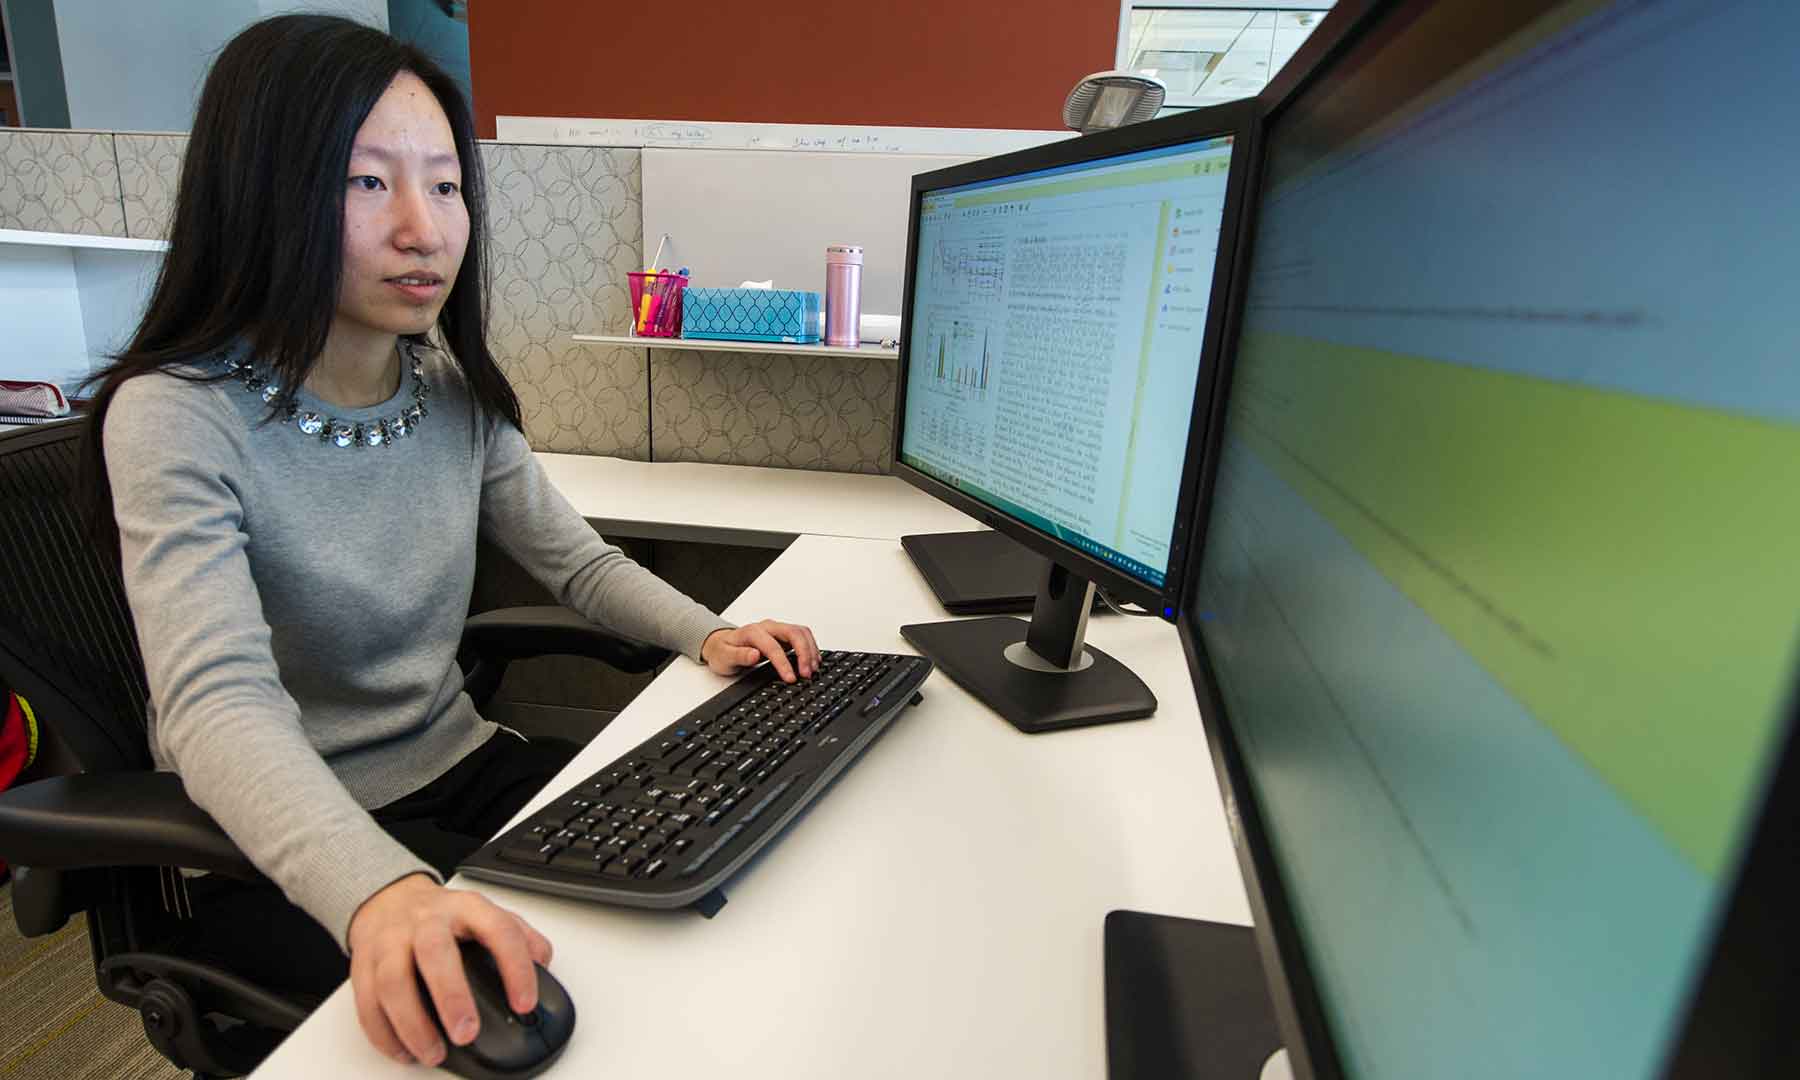 A woman works at a computer.